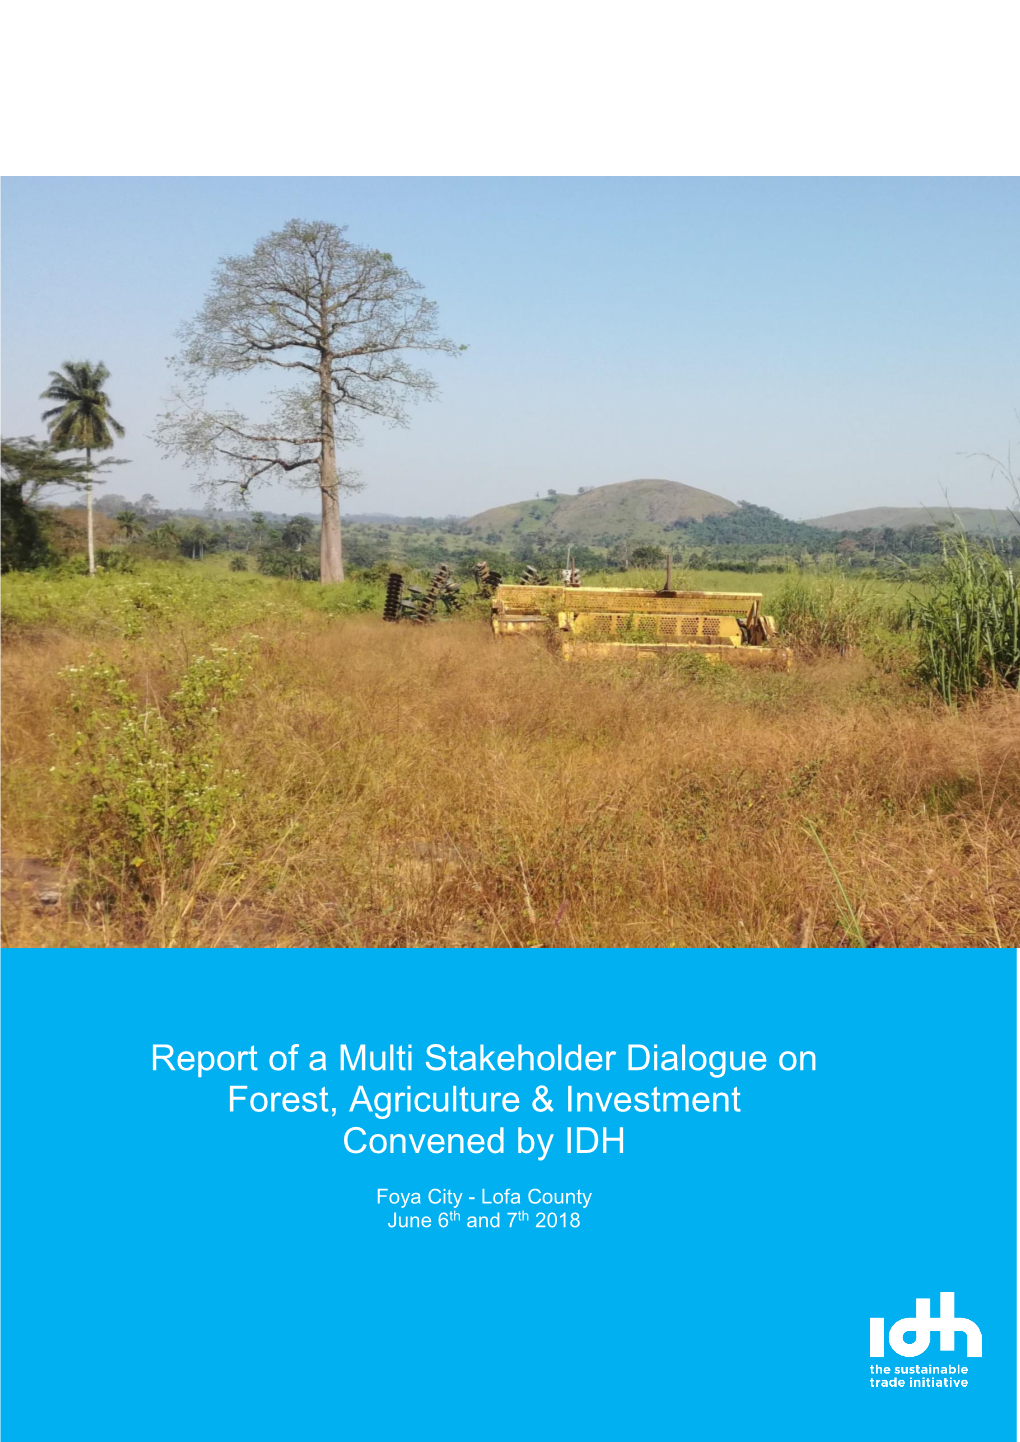 Stakeholder Intentions and Action Plan to Re-Green Foya District, Lofa County